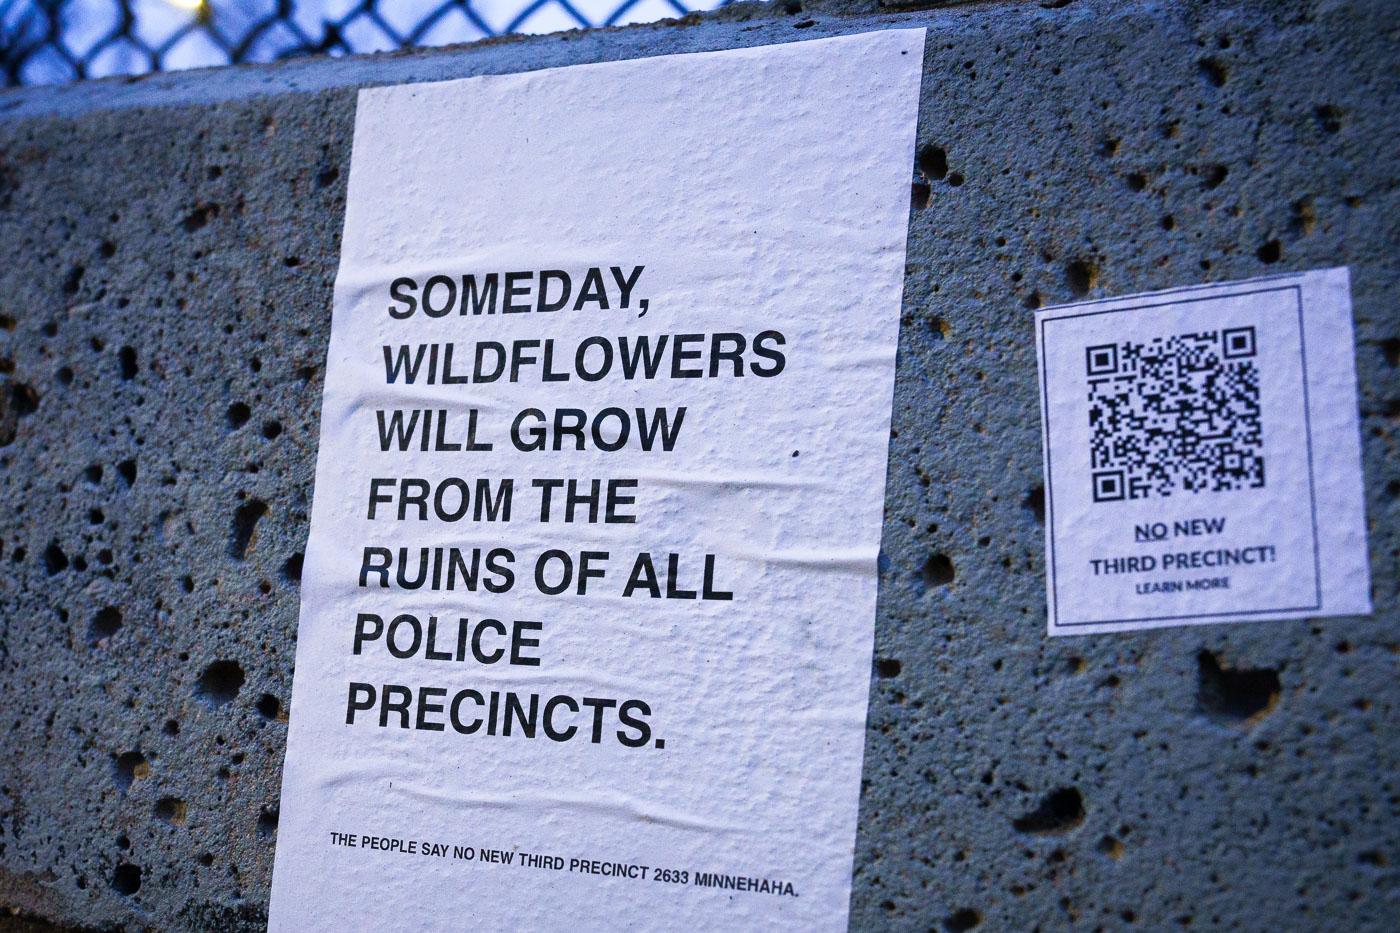 Flyers seen around the third precinct in South Minneapolis protesting the building of a replacement Minneapolis Police Third Precinct. Flyer reading "Someday, wildflowers will grow from the ruins of all police precincts".